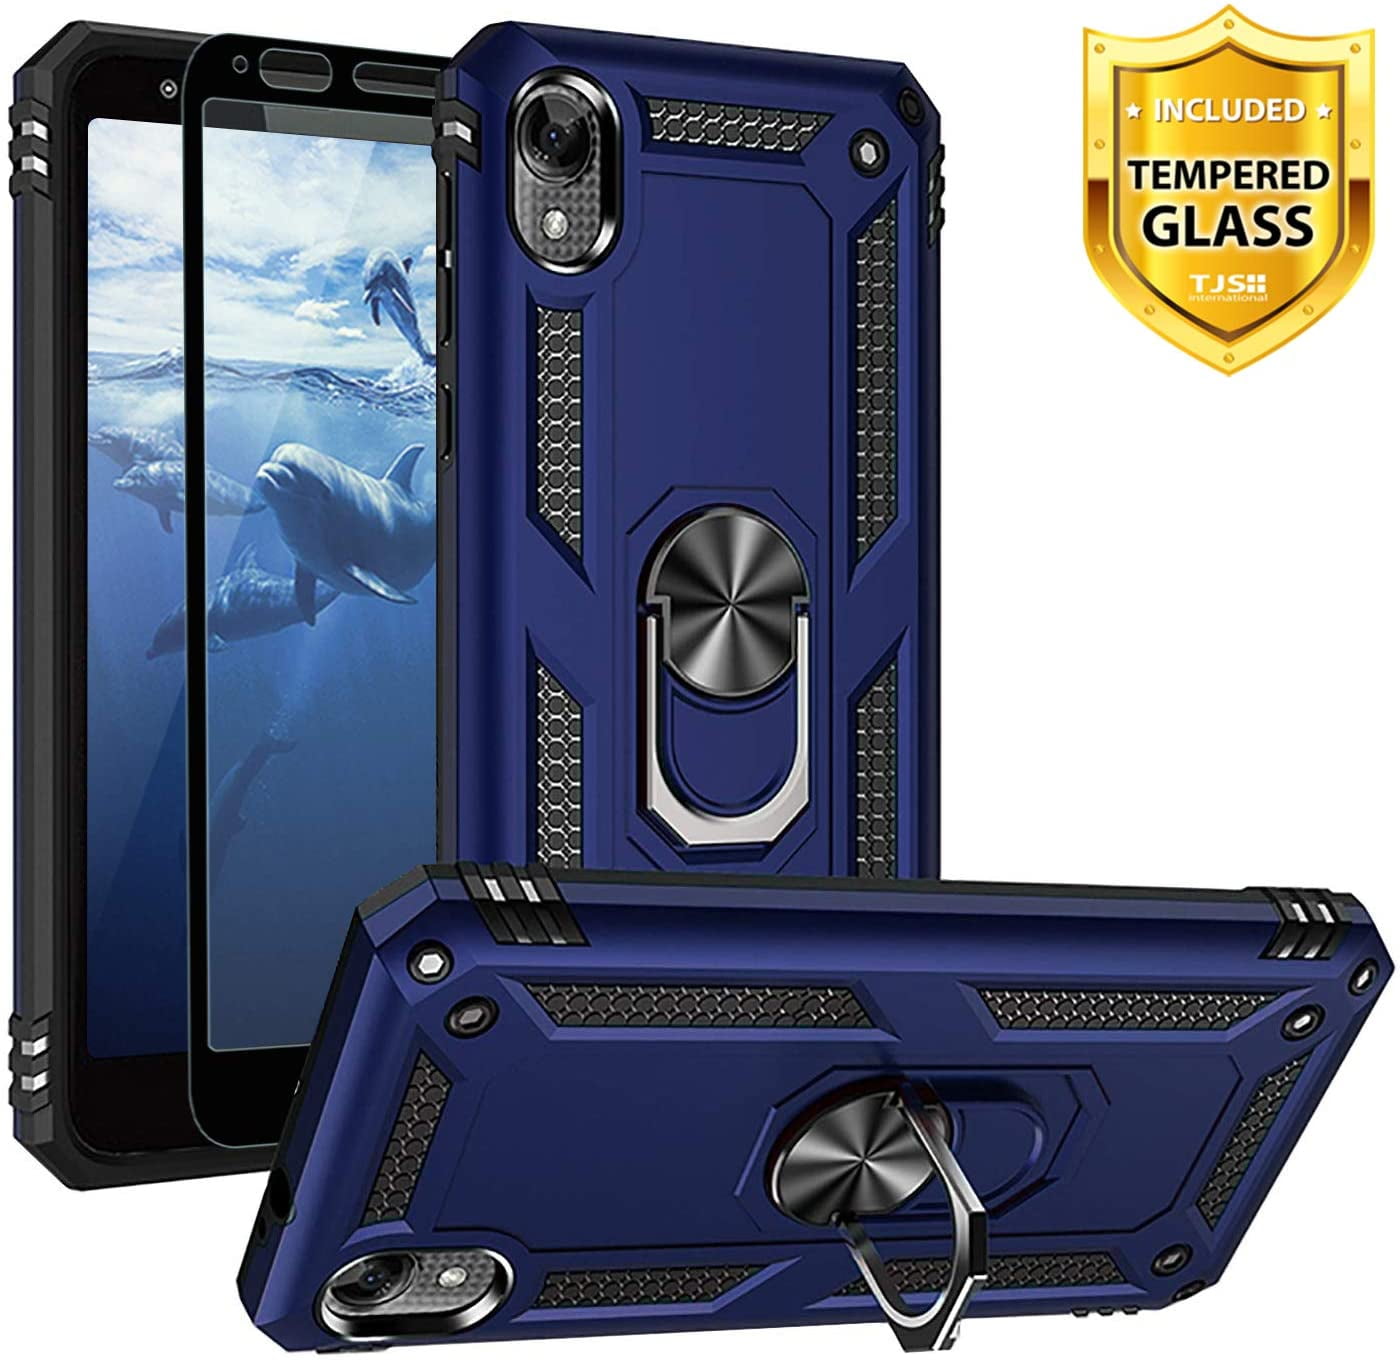 TJS Phone Case for Motorola Moto E6, [Full Coverage Tempered Glass Screen Protector][Impact Resistant][Defender][Metal Ring][Magnetic][Support] Heavy Duty Armor Phone Cover (Blue)